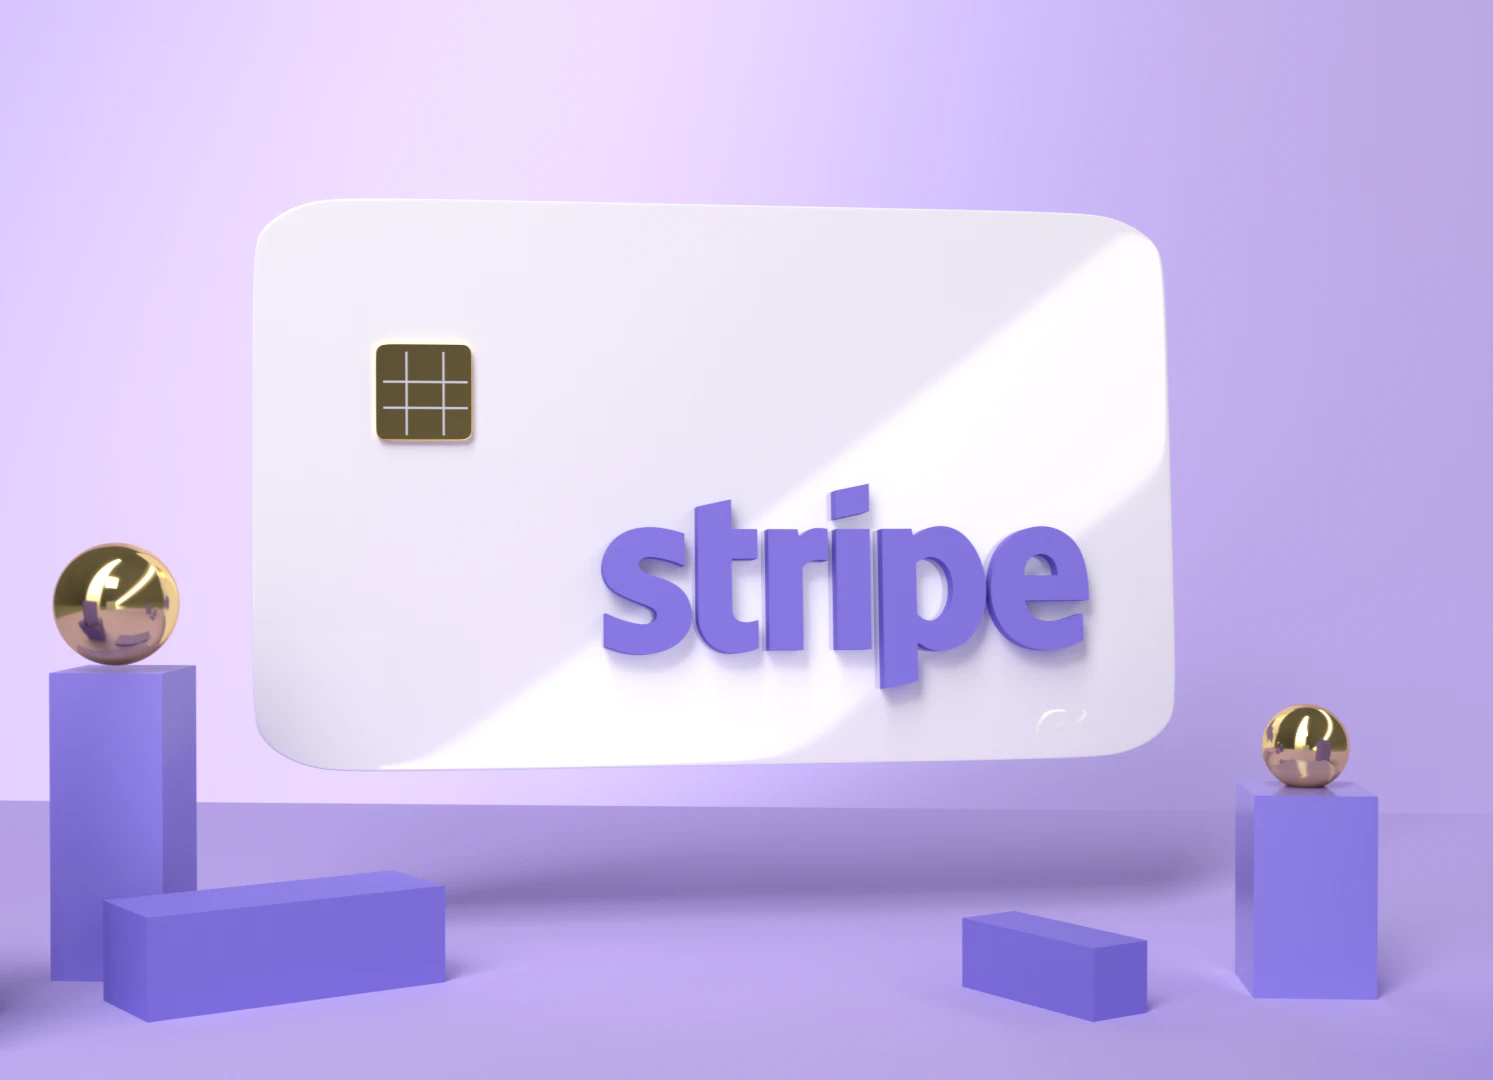 an image of stripe's logo in a purple background